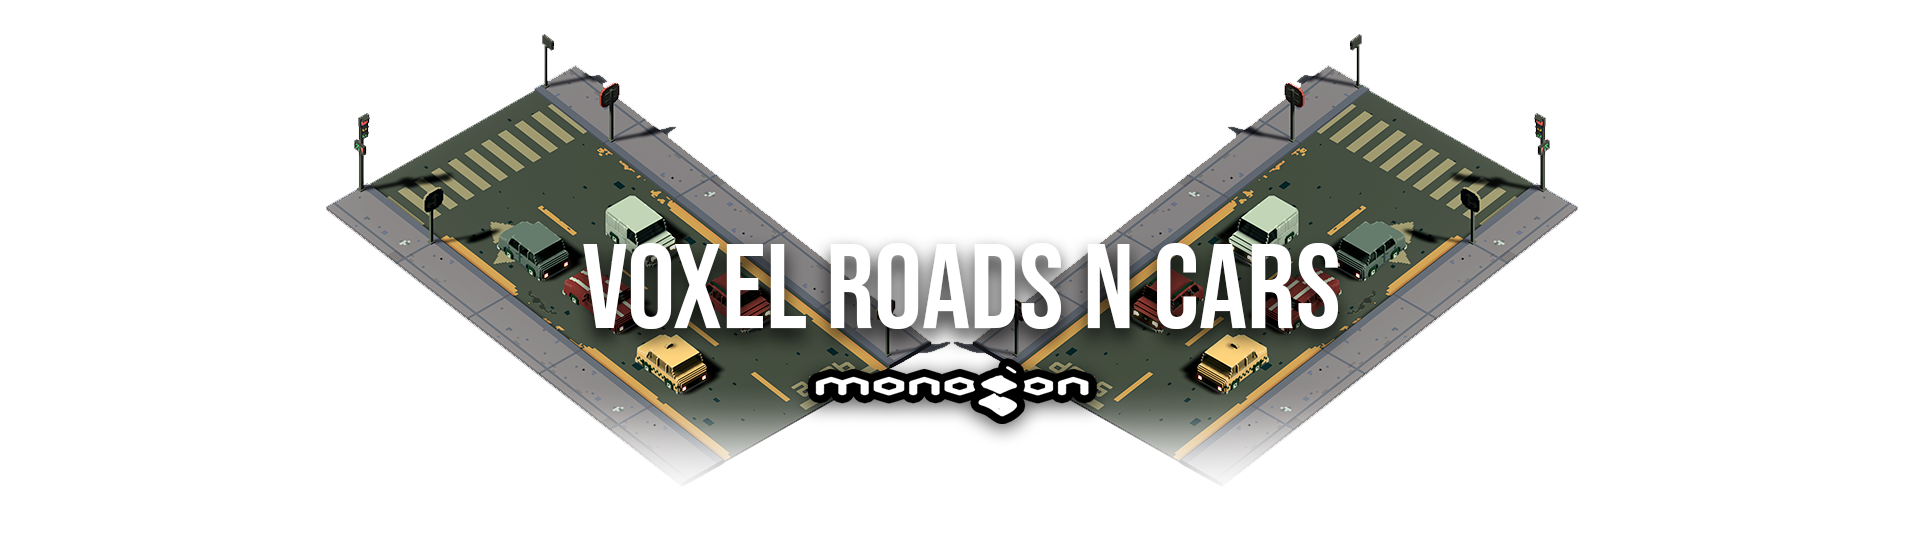 Voxel Roads and Cars - monogon